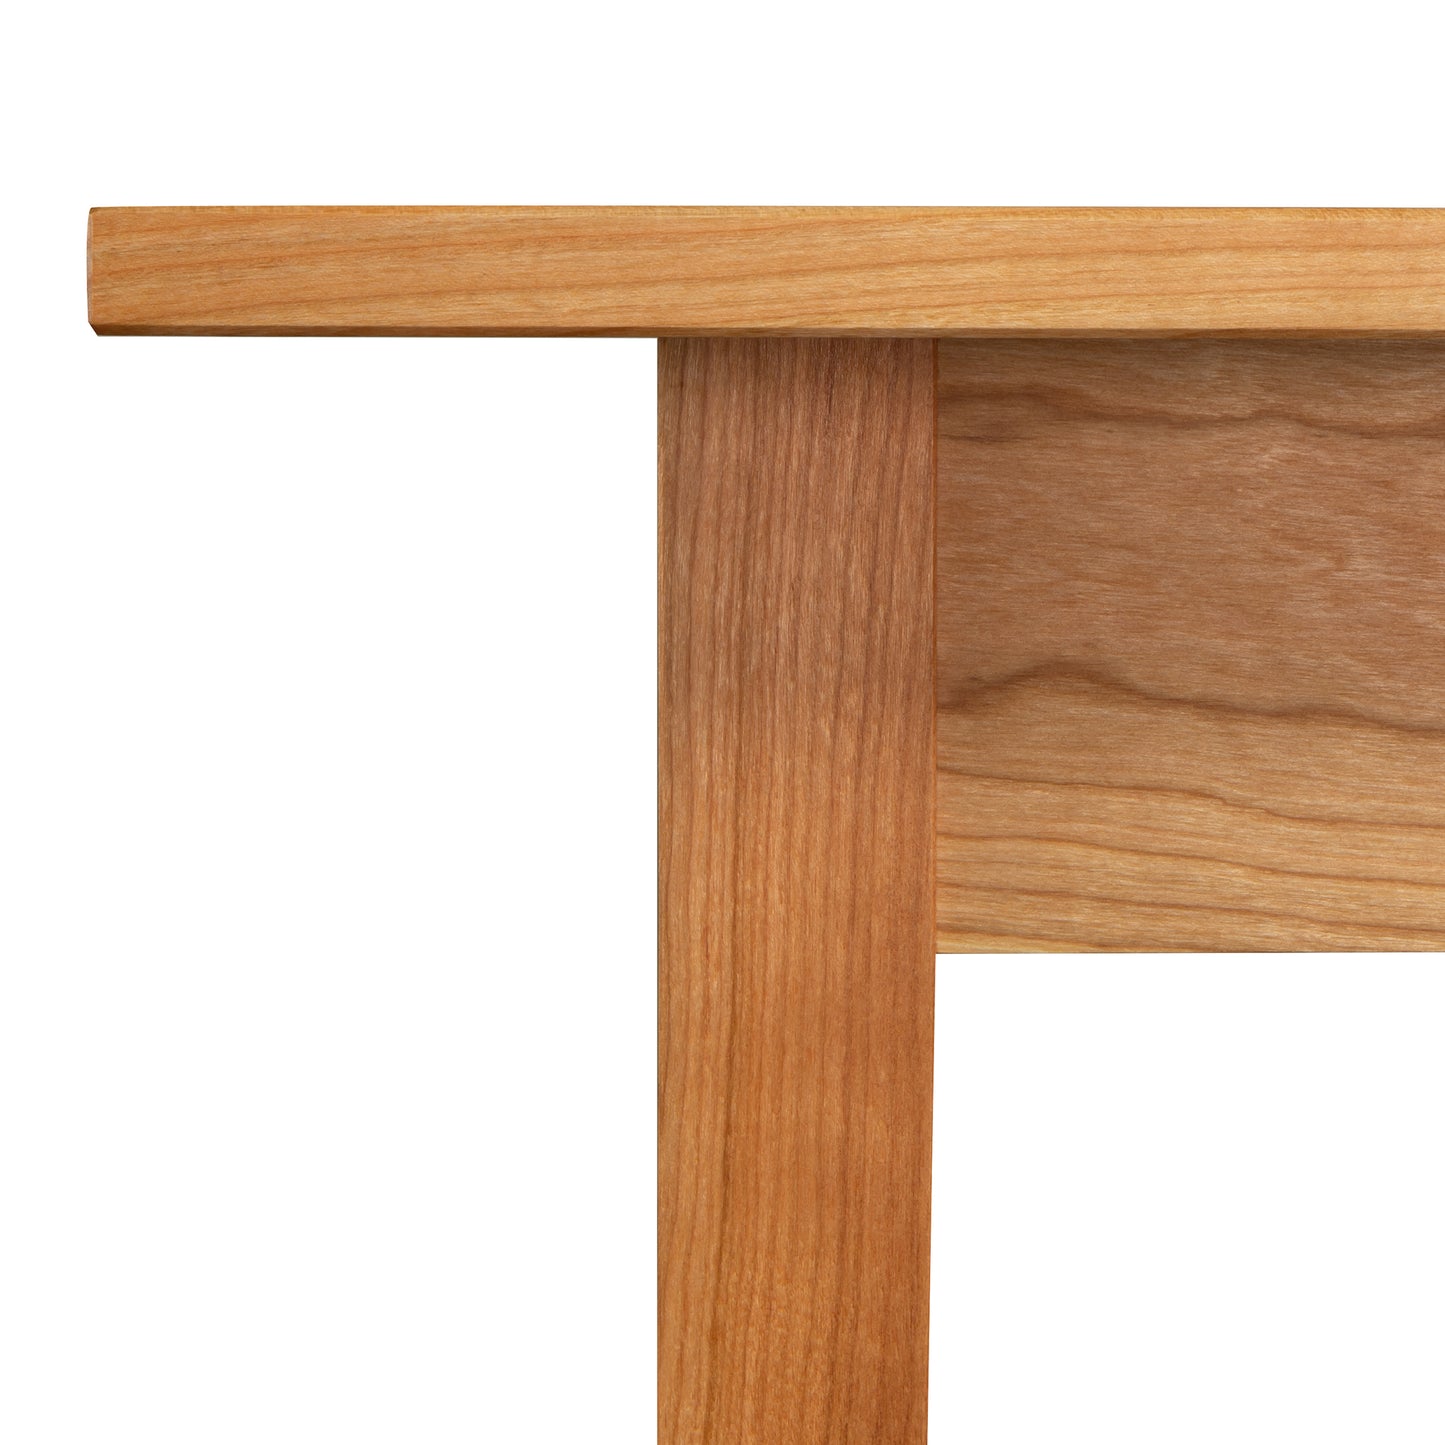 A close up of a Vermont Woods Studios Country Shaker Dining Table.